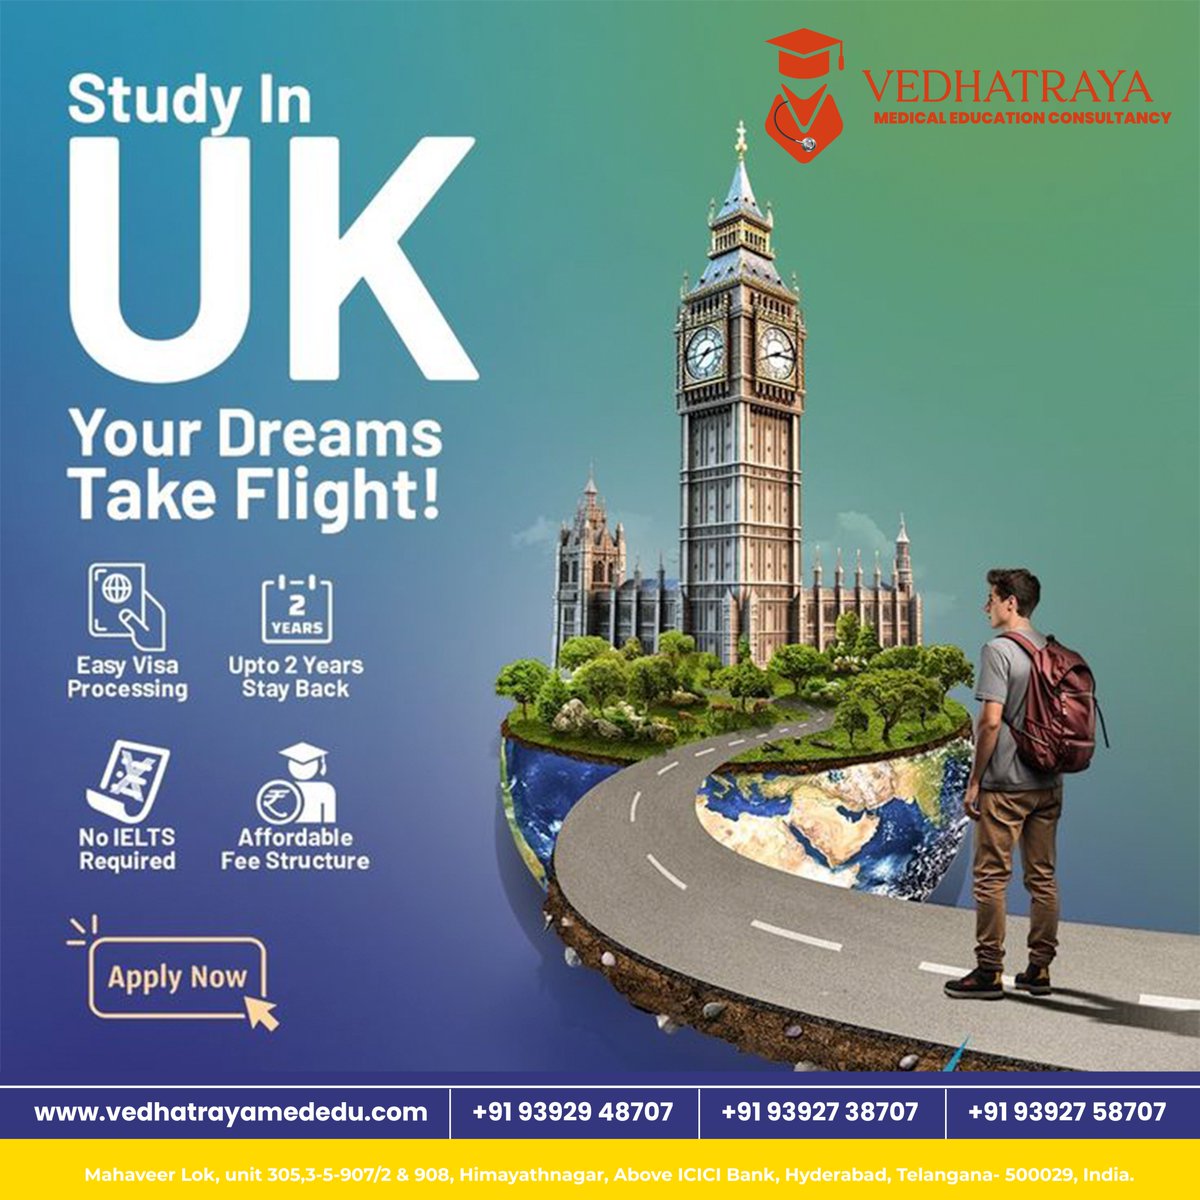 MBBS education services in the UK. With expert guidance and personalized support, embark on your journey towards a rewarding medical career.

Call: +91 9392948707 or vedhatrayamededu.com

#MBBS #StudyAbroad #Vedhatraya #MedicalEducation #mbbseducation #student #mbbsuk